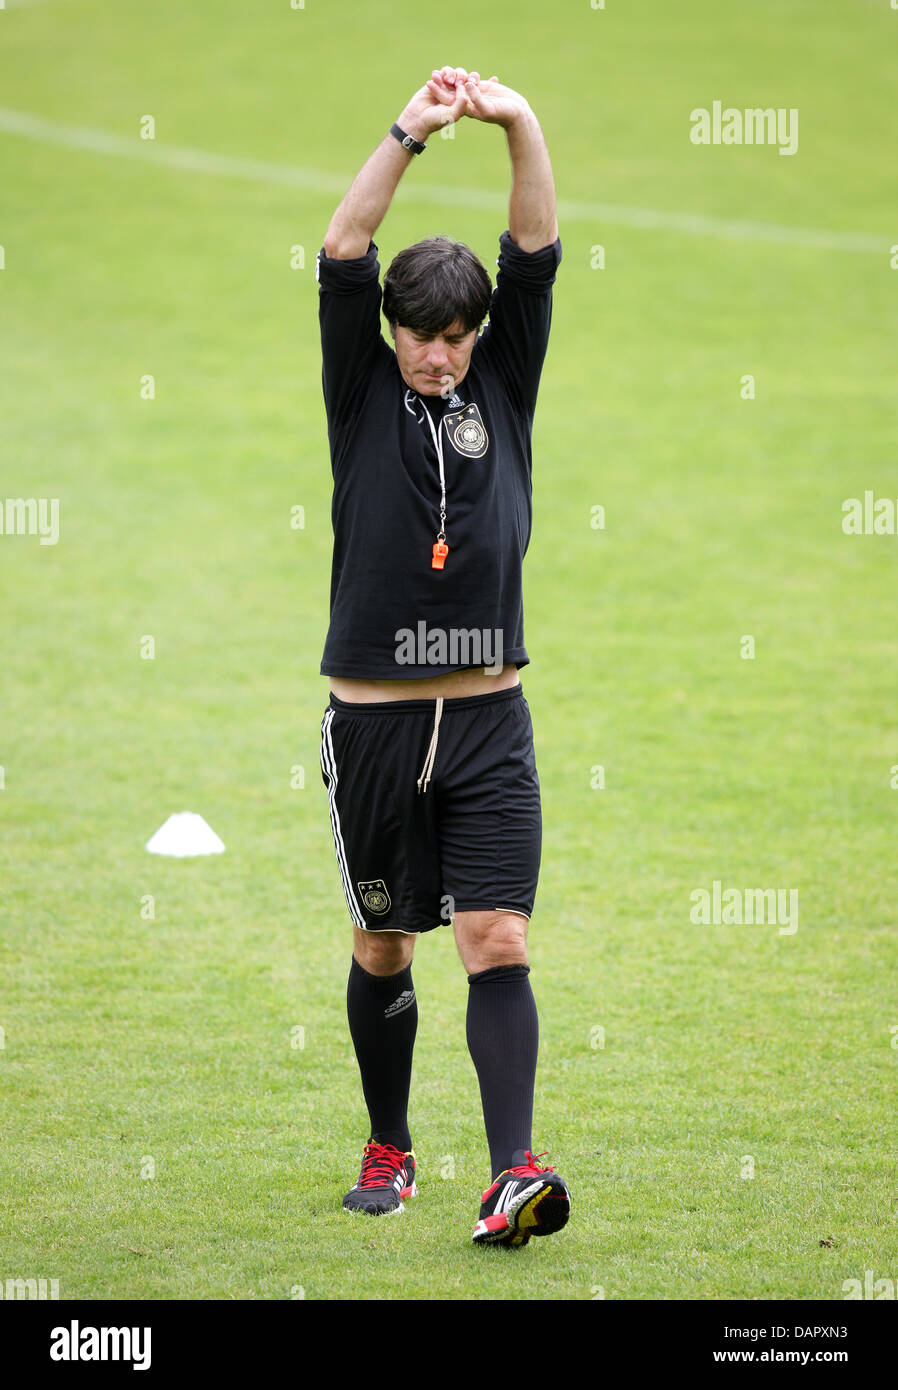 German national soccer team coach Joachim Loew stretches during a practice session at Paul Janes Stadium in Duesseldorf, Germany, 04 September 2011. On 06 September 2011, Germany will play Poland in a friendly match in Gdansk, Poland. Photo: Rolf Vennenbernd Stock Photo